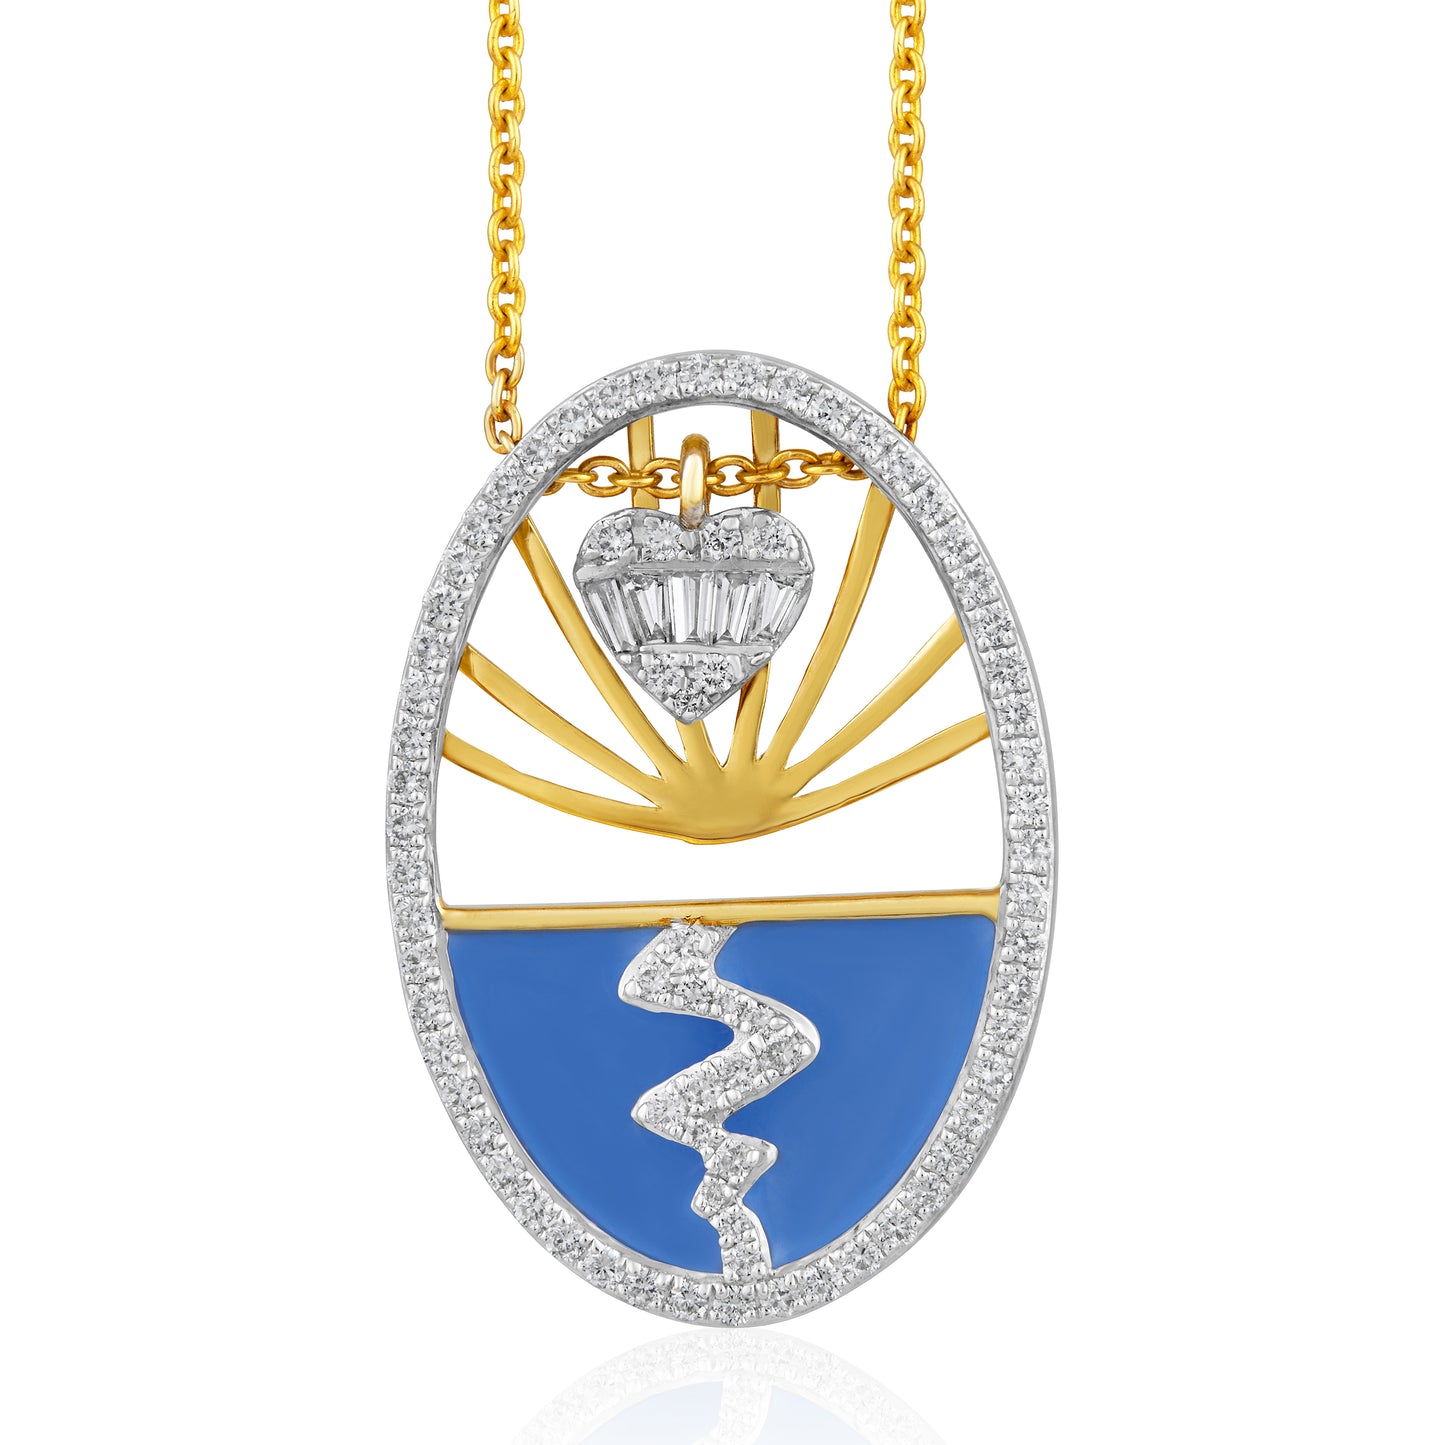 Lake of Love Pendant with Chain